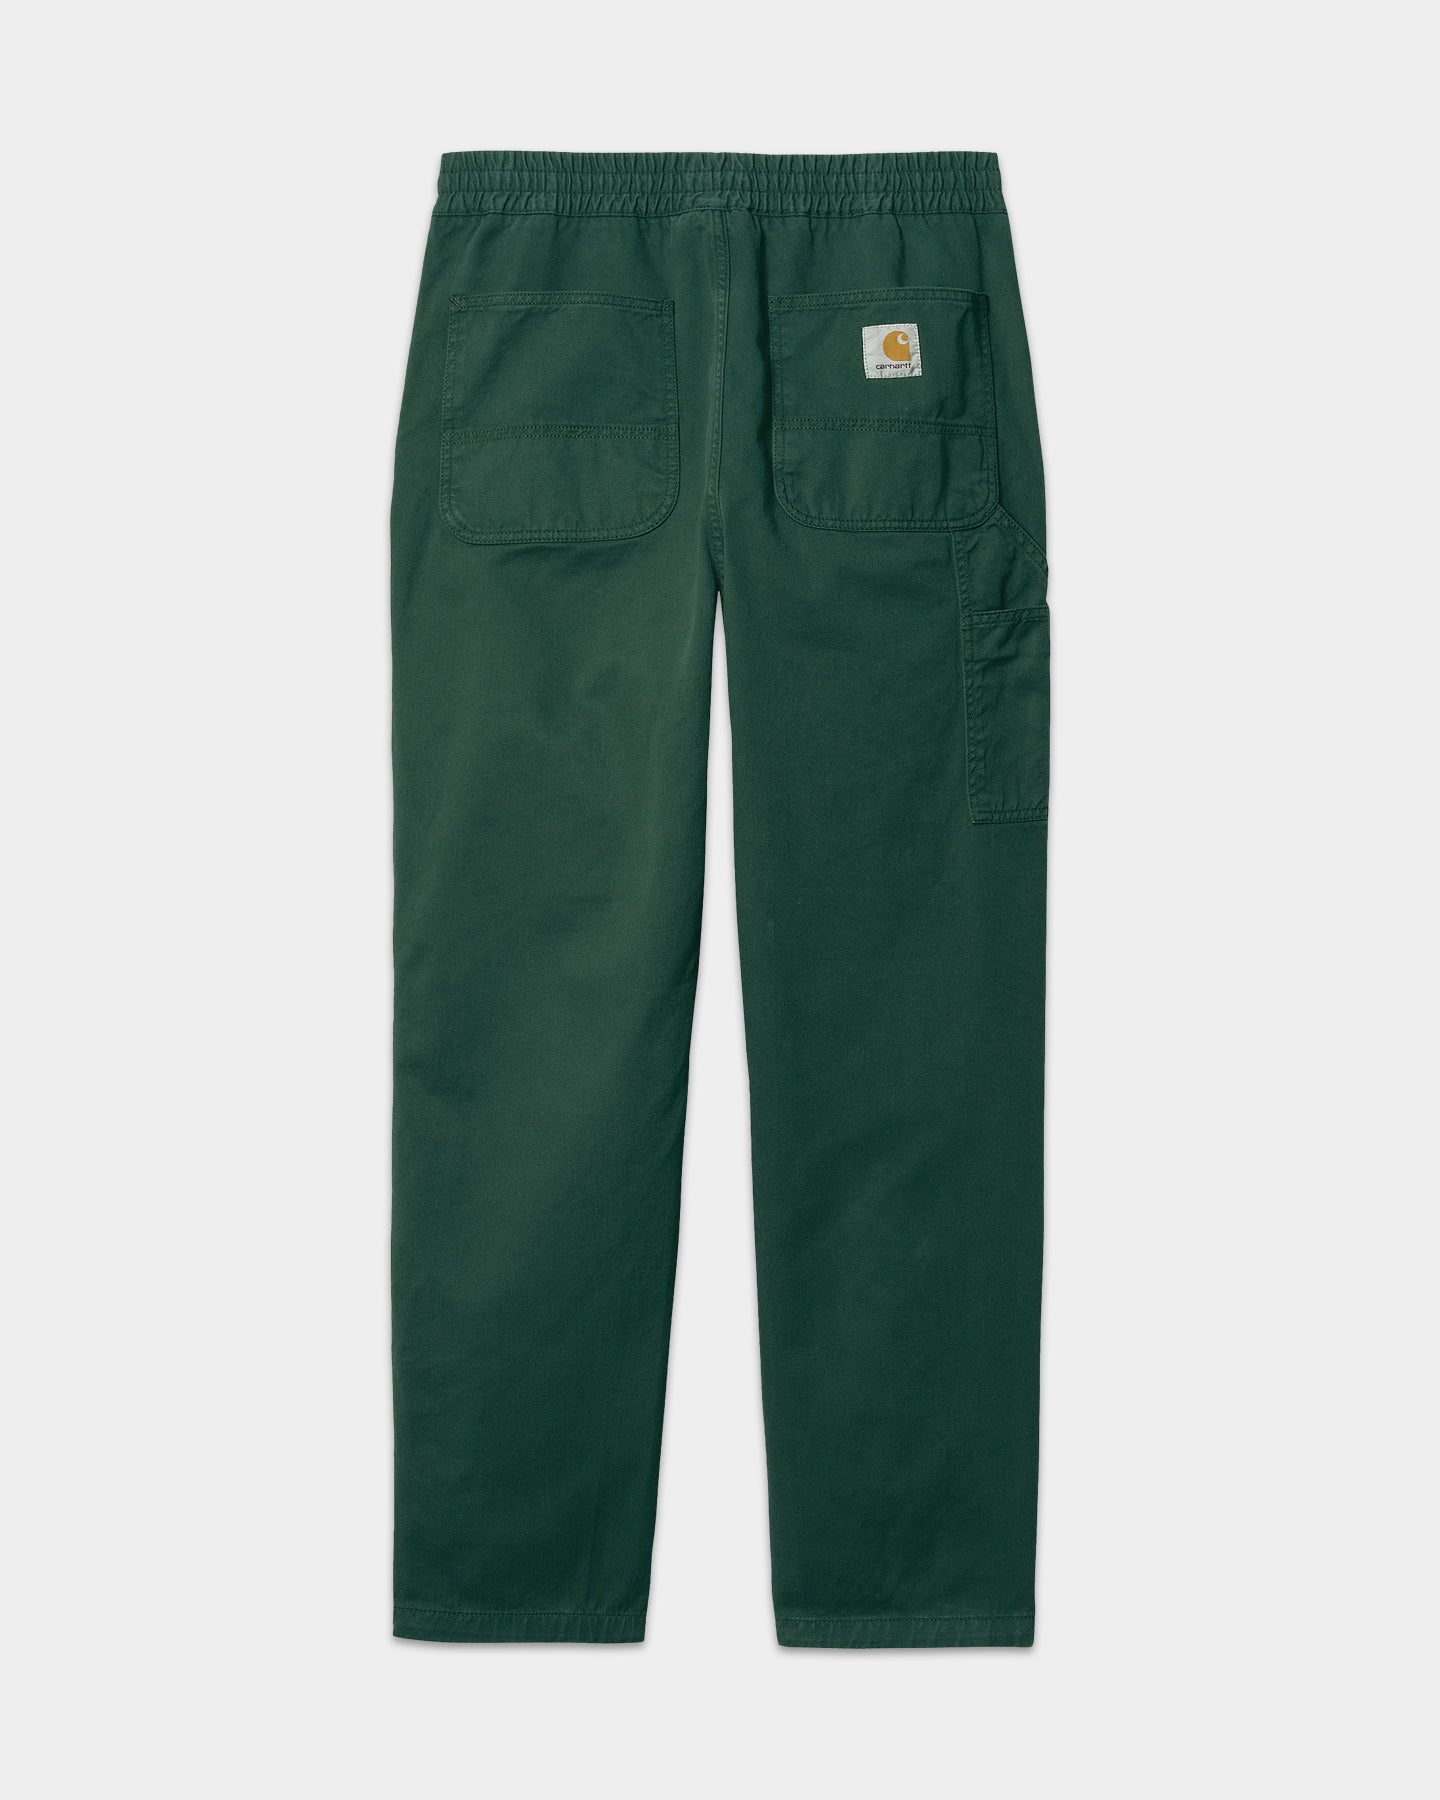 FLINT PANT - discovery green (garment dyed)